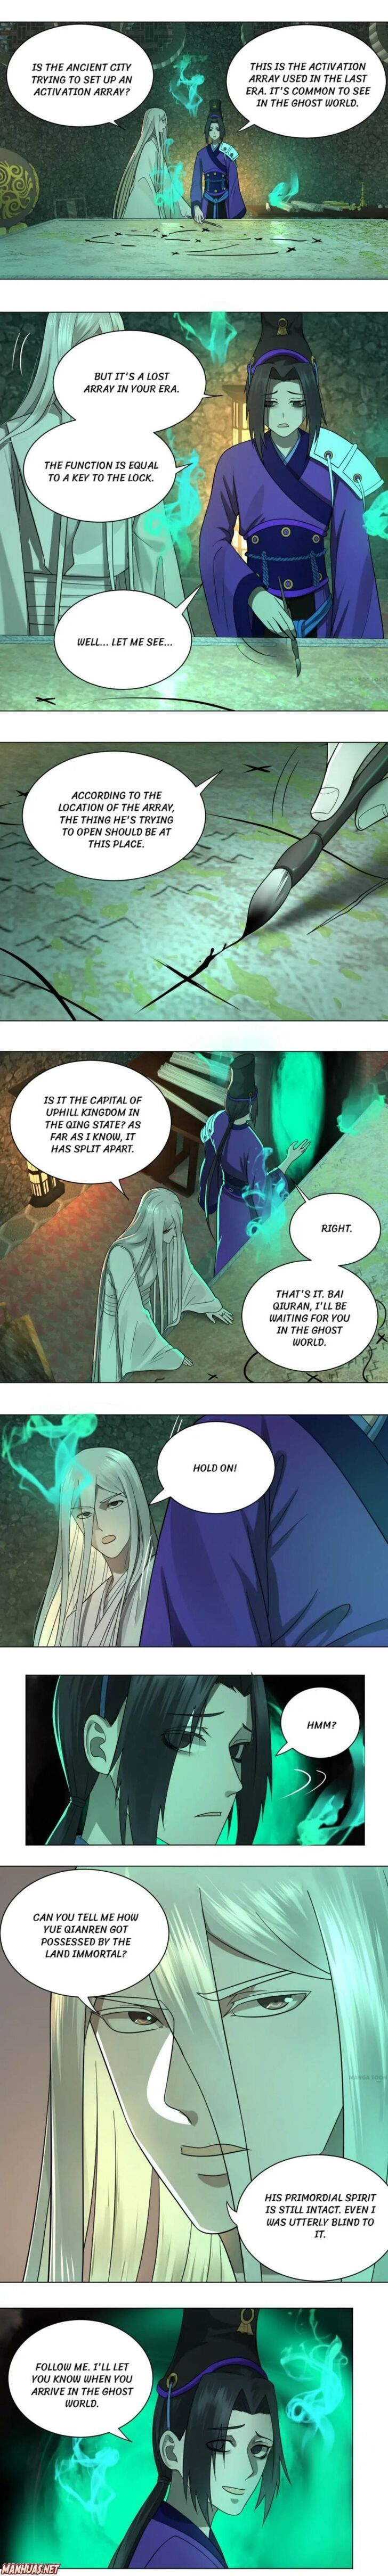 My Three Thousand Years to the Sky Chapter 068 page 1